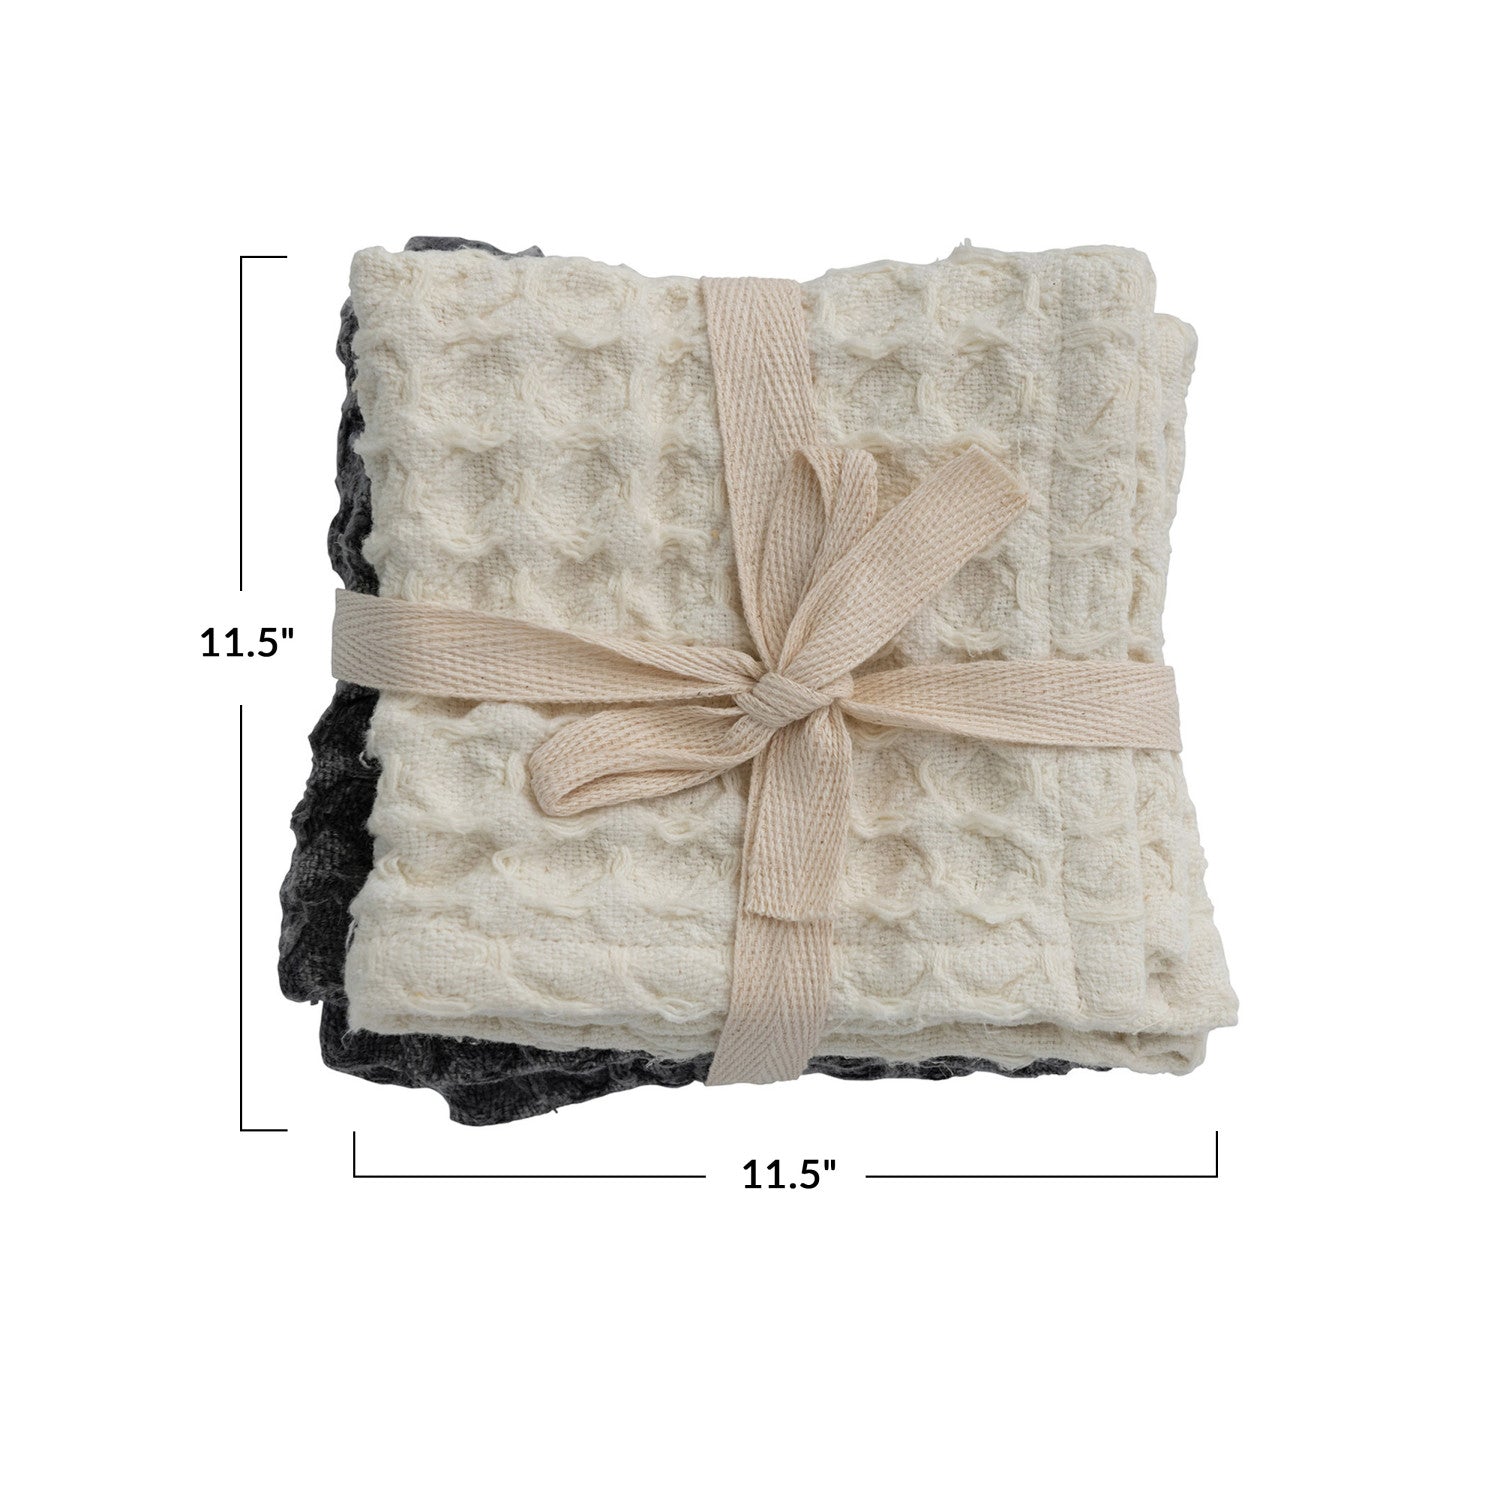 Square Cotton Dish Towels, Cotton Waffle Woven Kitchen Tableware